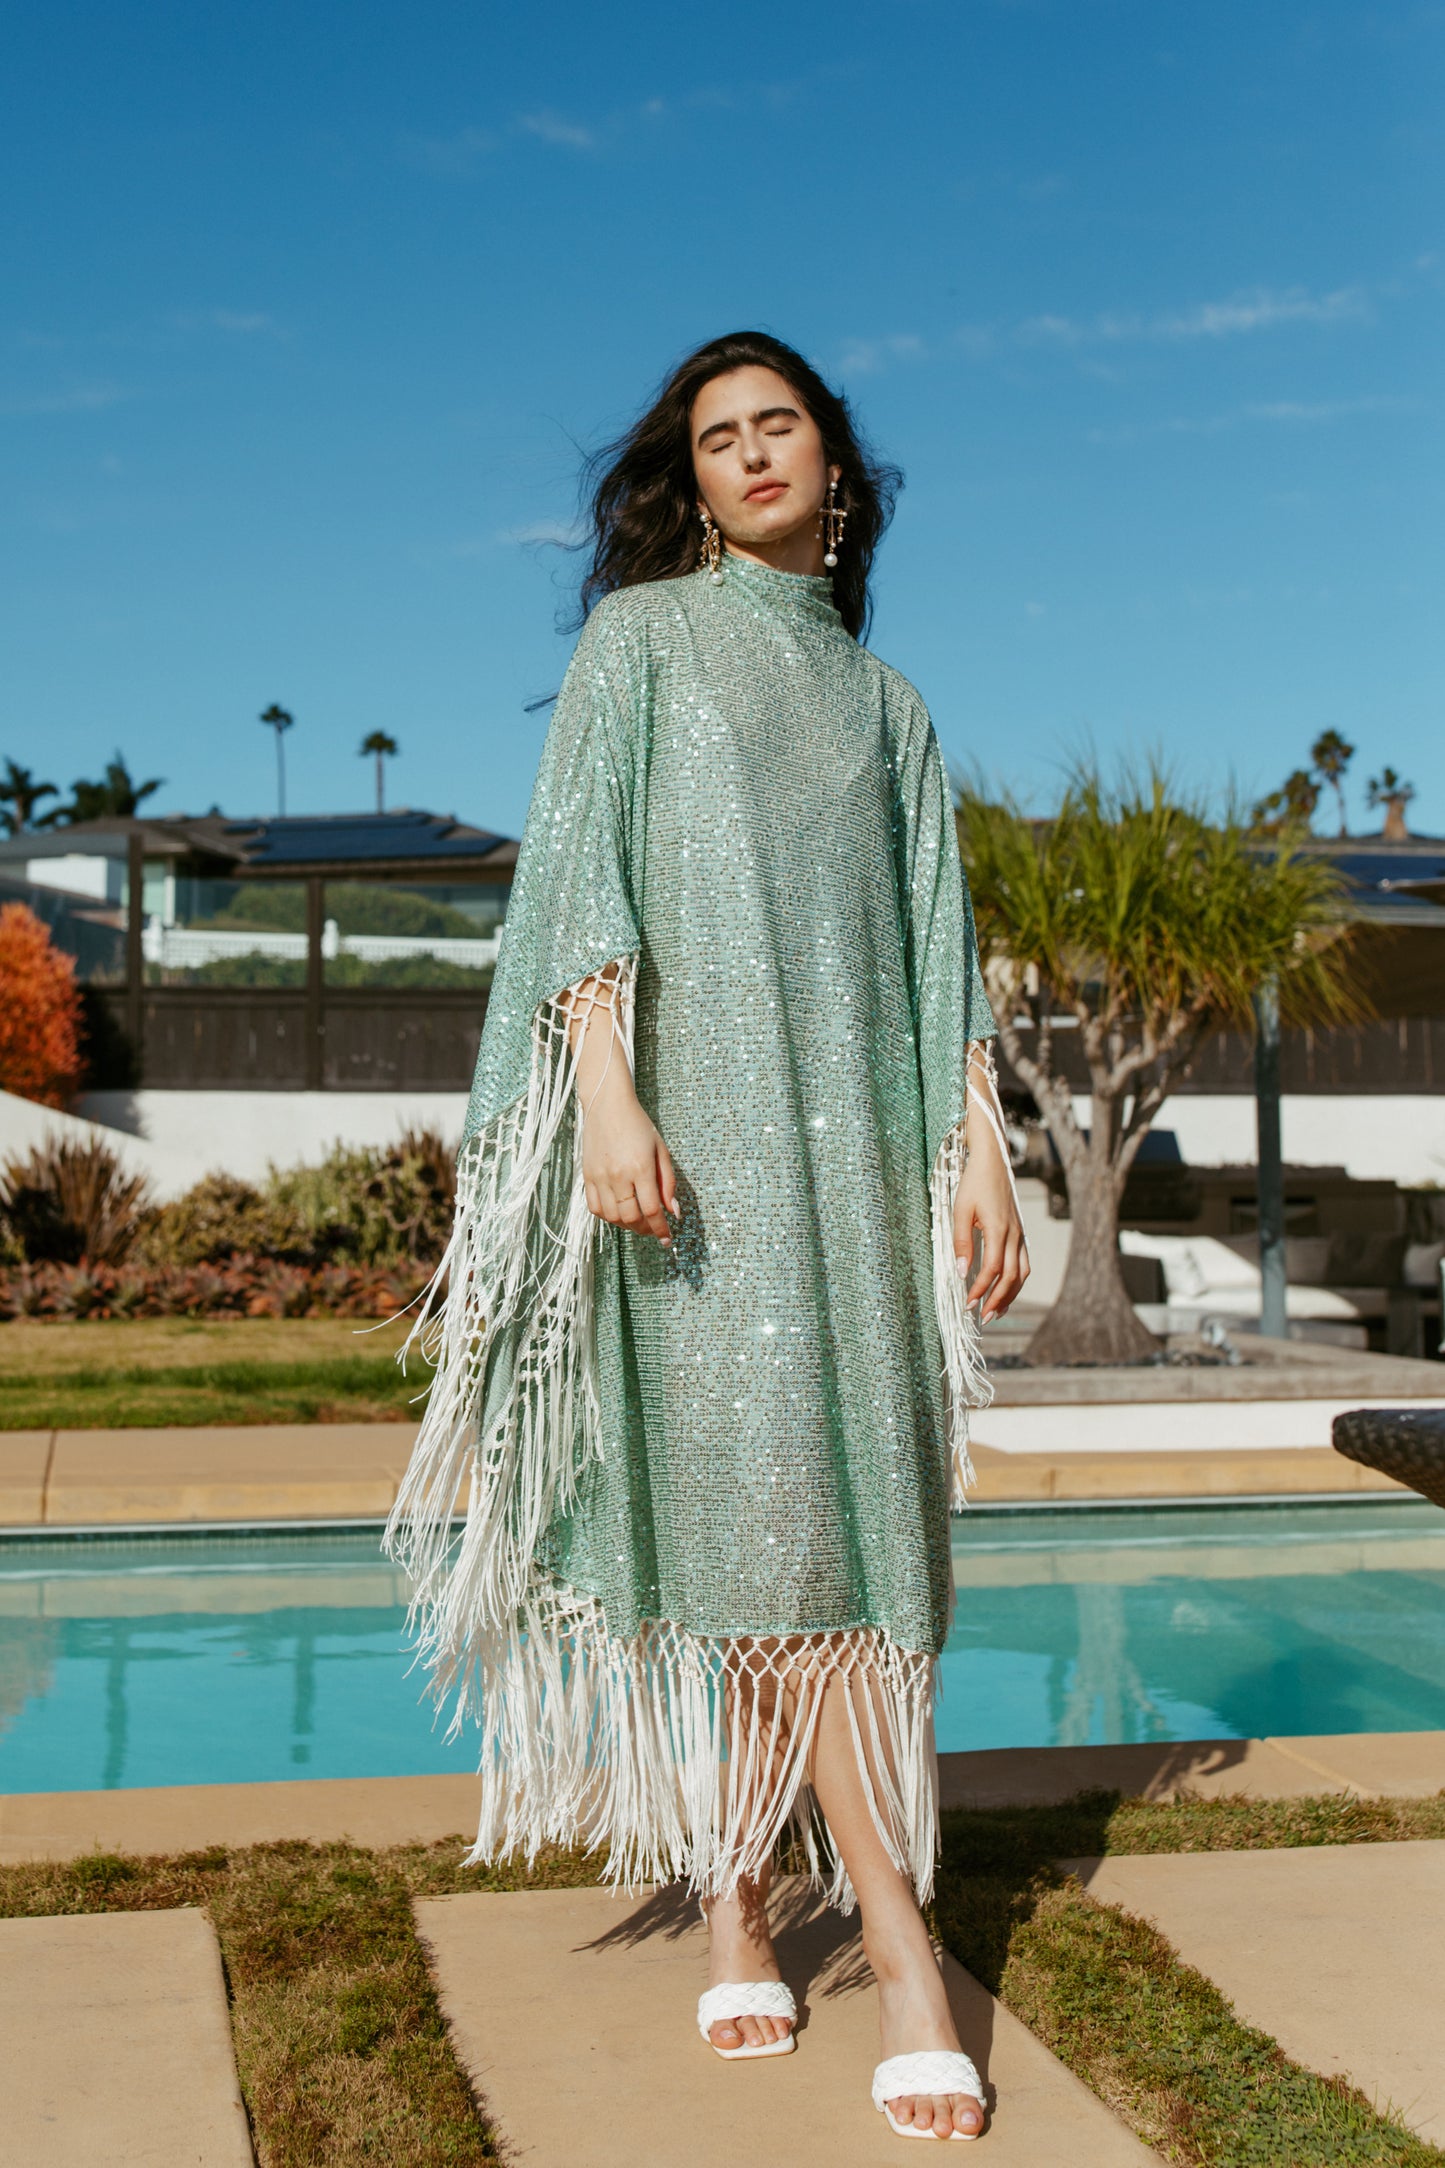 This caftan is a dazzling, full-length garment featuring a shimmering seafoam green sequin overlay on a mesh fabric. The sequins catch the light, creating a sparkling effect throughout. It has a mock neck collar with a straight, loose fit that drapes elegantly over the body. The edges of the caftan, including the hem and the sides, are embellished with long, ivory silk fringe that add movement and a playful flair to an elegant and timeless design.